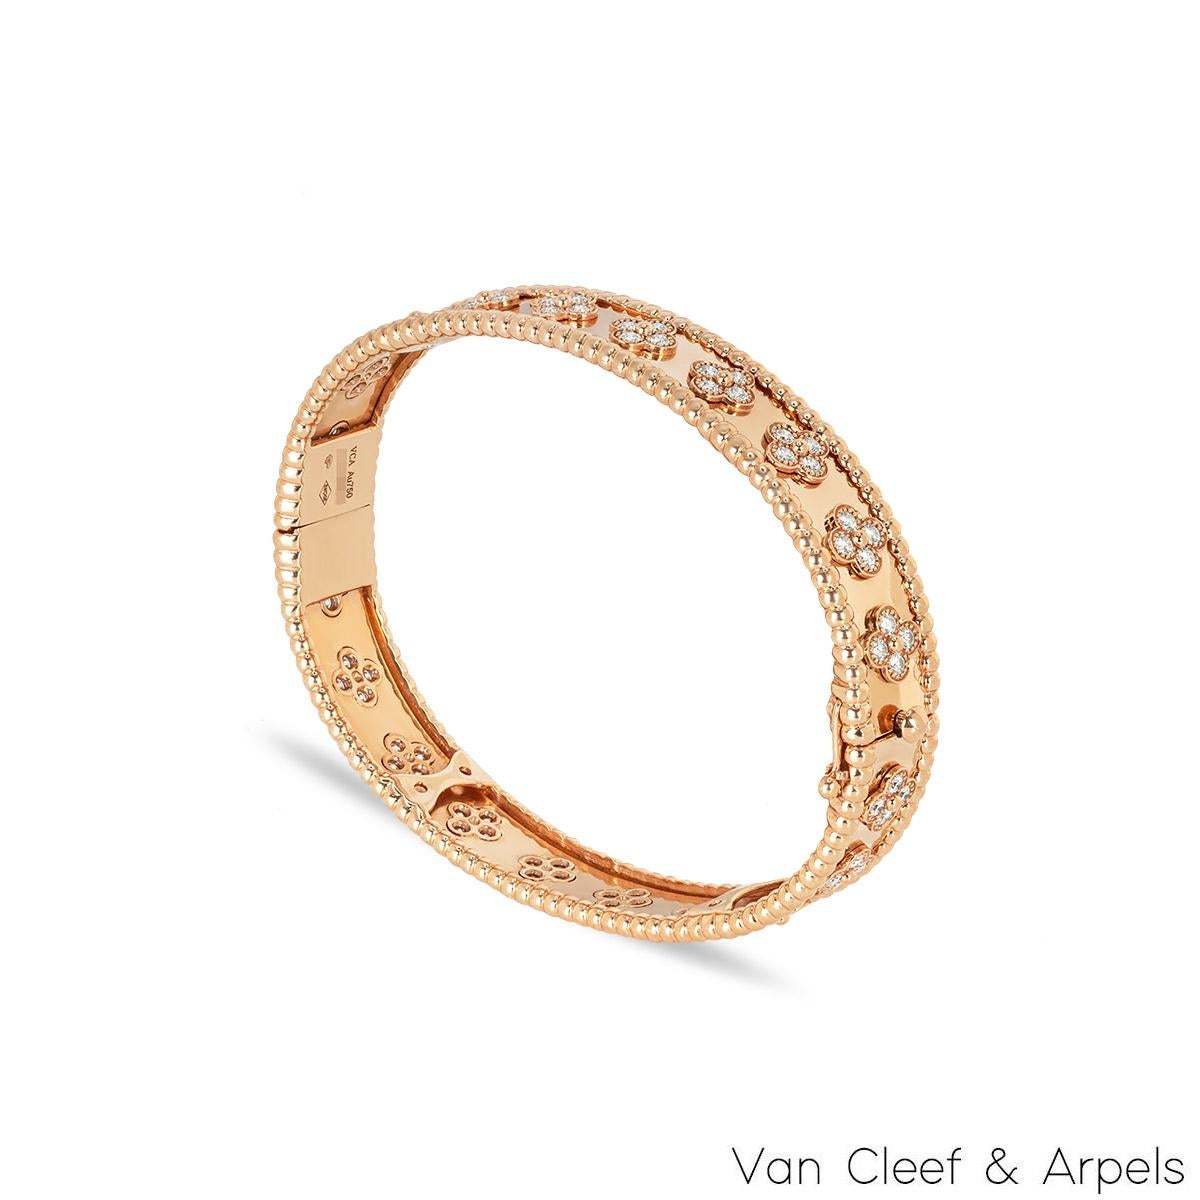 A beautiful 18k rose gold bracelet by Van Cleef & Arpels from the Perlée Clovers collection. The bracelet features 20 four leaf clover motifs, each set with 4 round brilliant cut diamonds with an approximate total weight of 1.78ct, E-F colour and